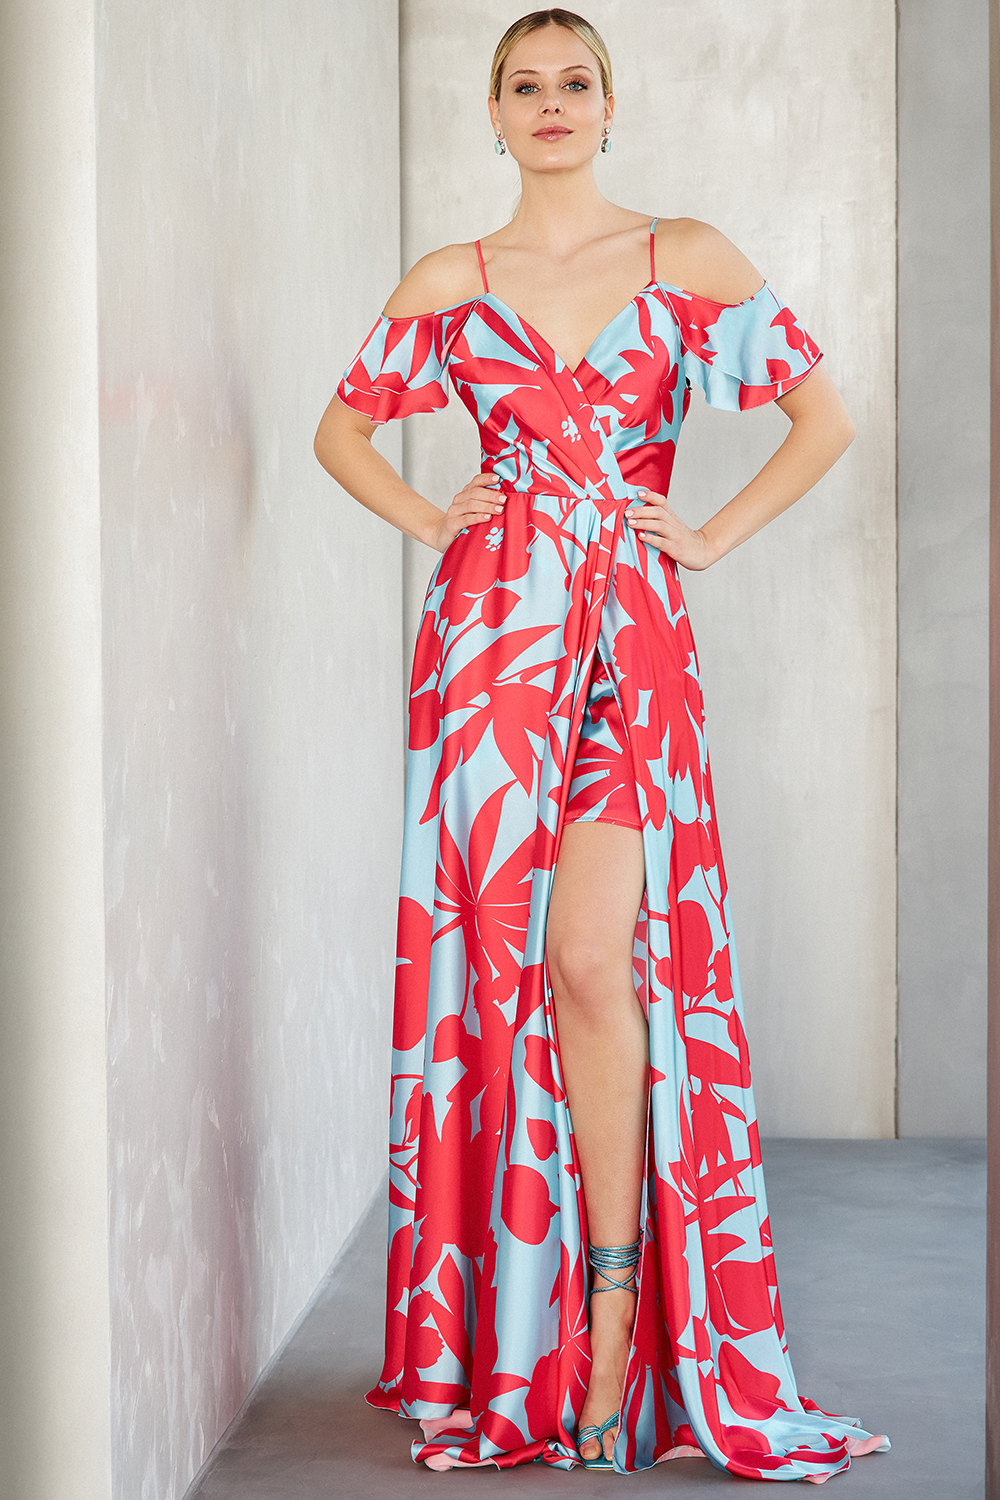 Коктейльные платья / Long cocktail satin dress with printed fabric, open back and sleeves